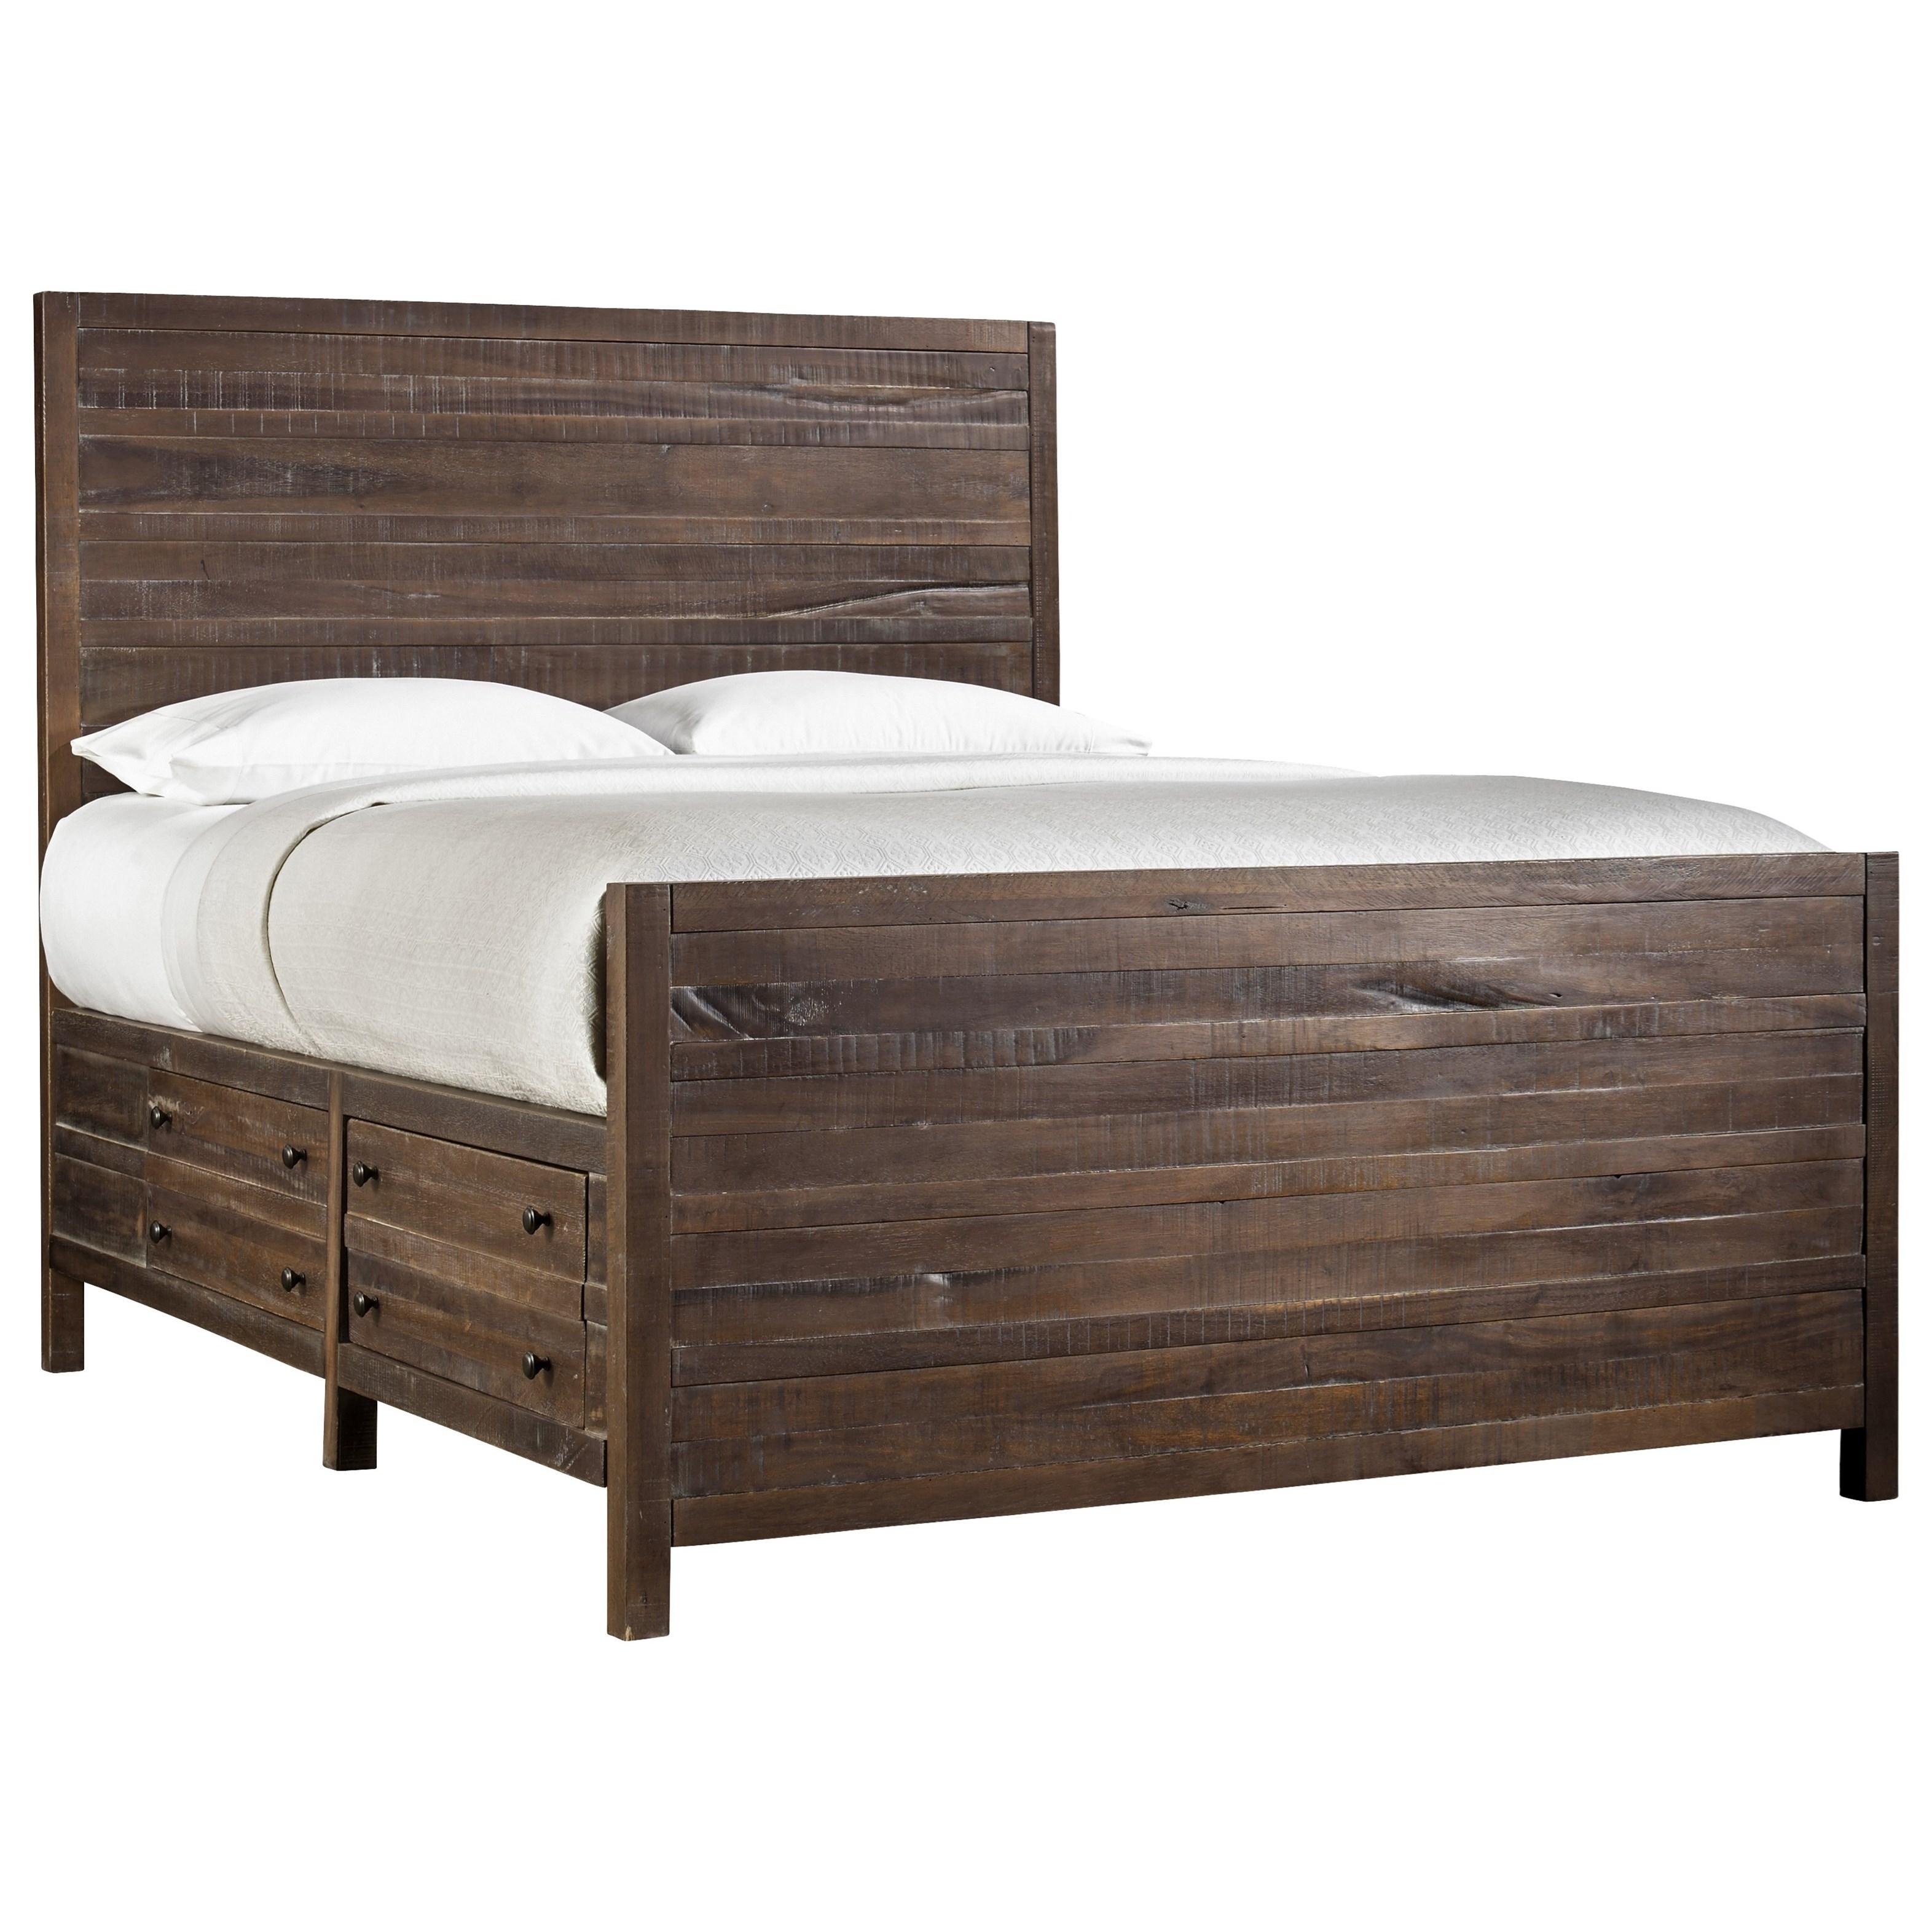 Contemporary Storage Bed TOWNSEND 8T06D6 in Java 